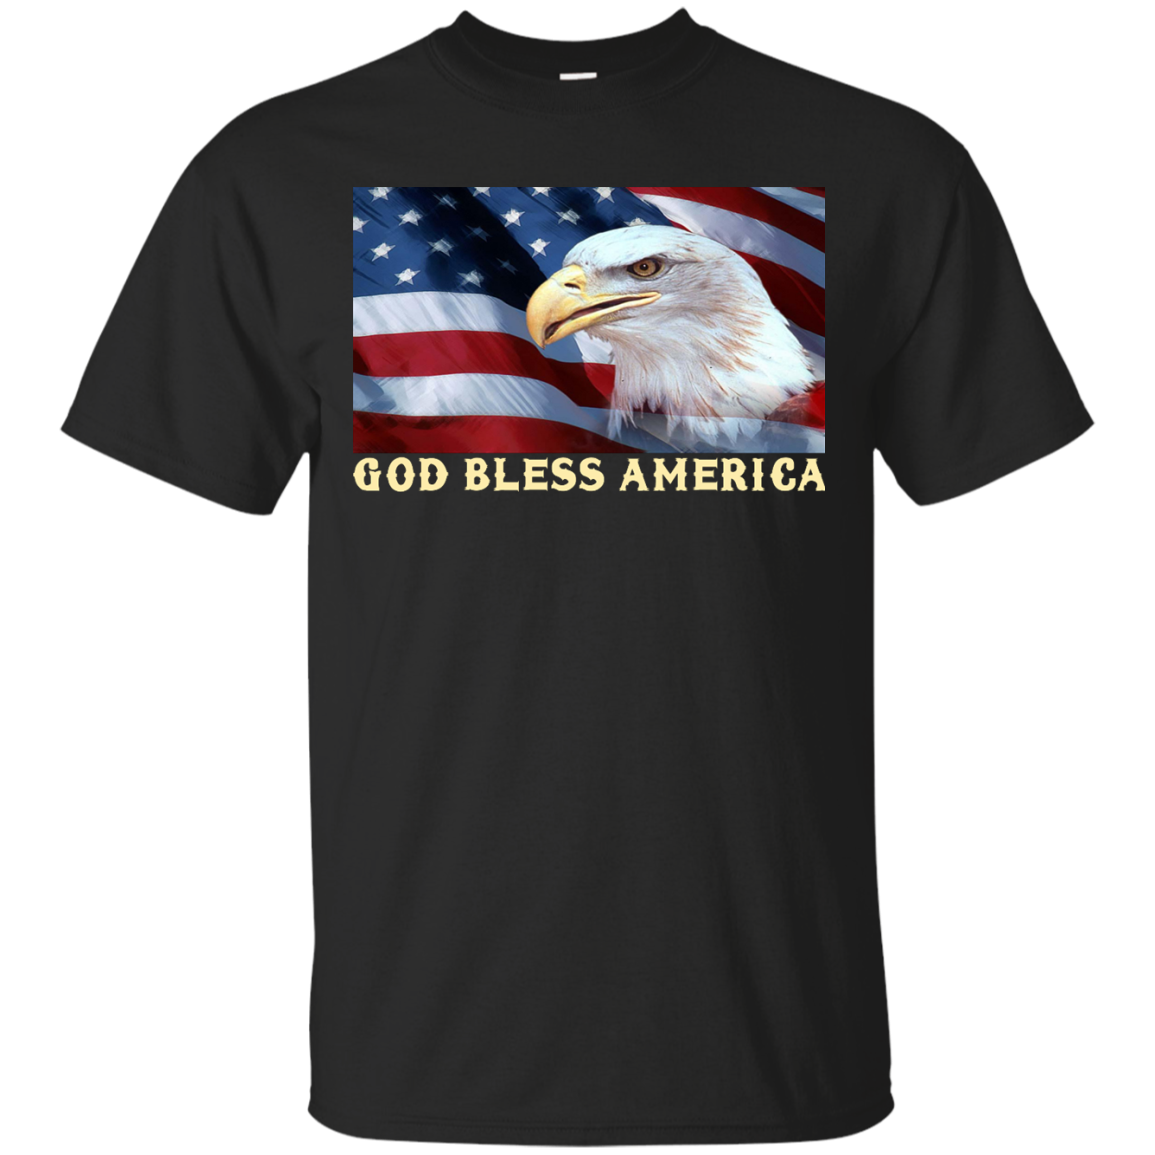 Independence Day: God Bless America shirt, tank, hoodie